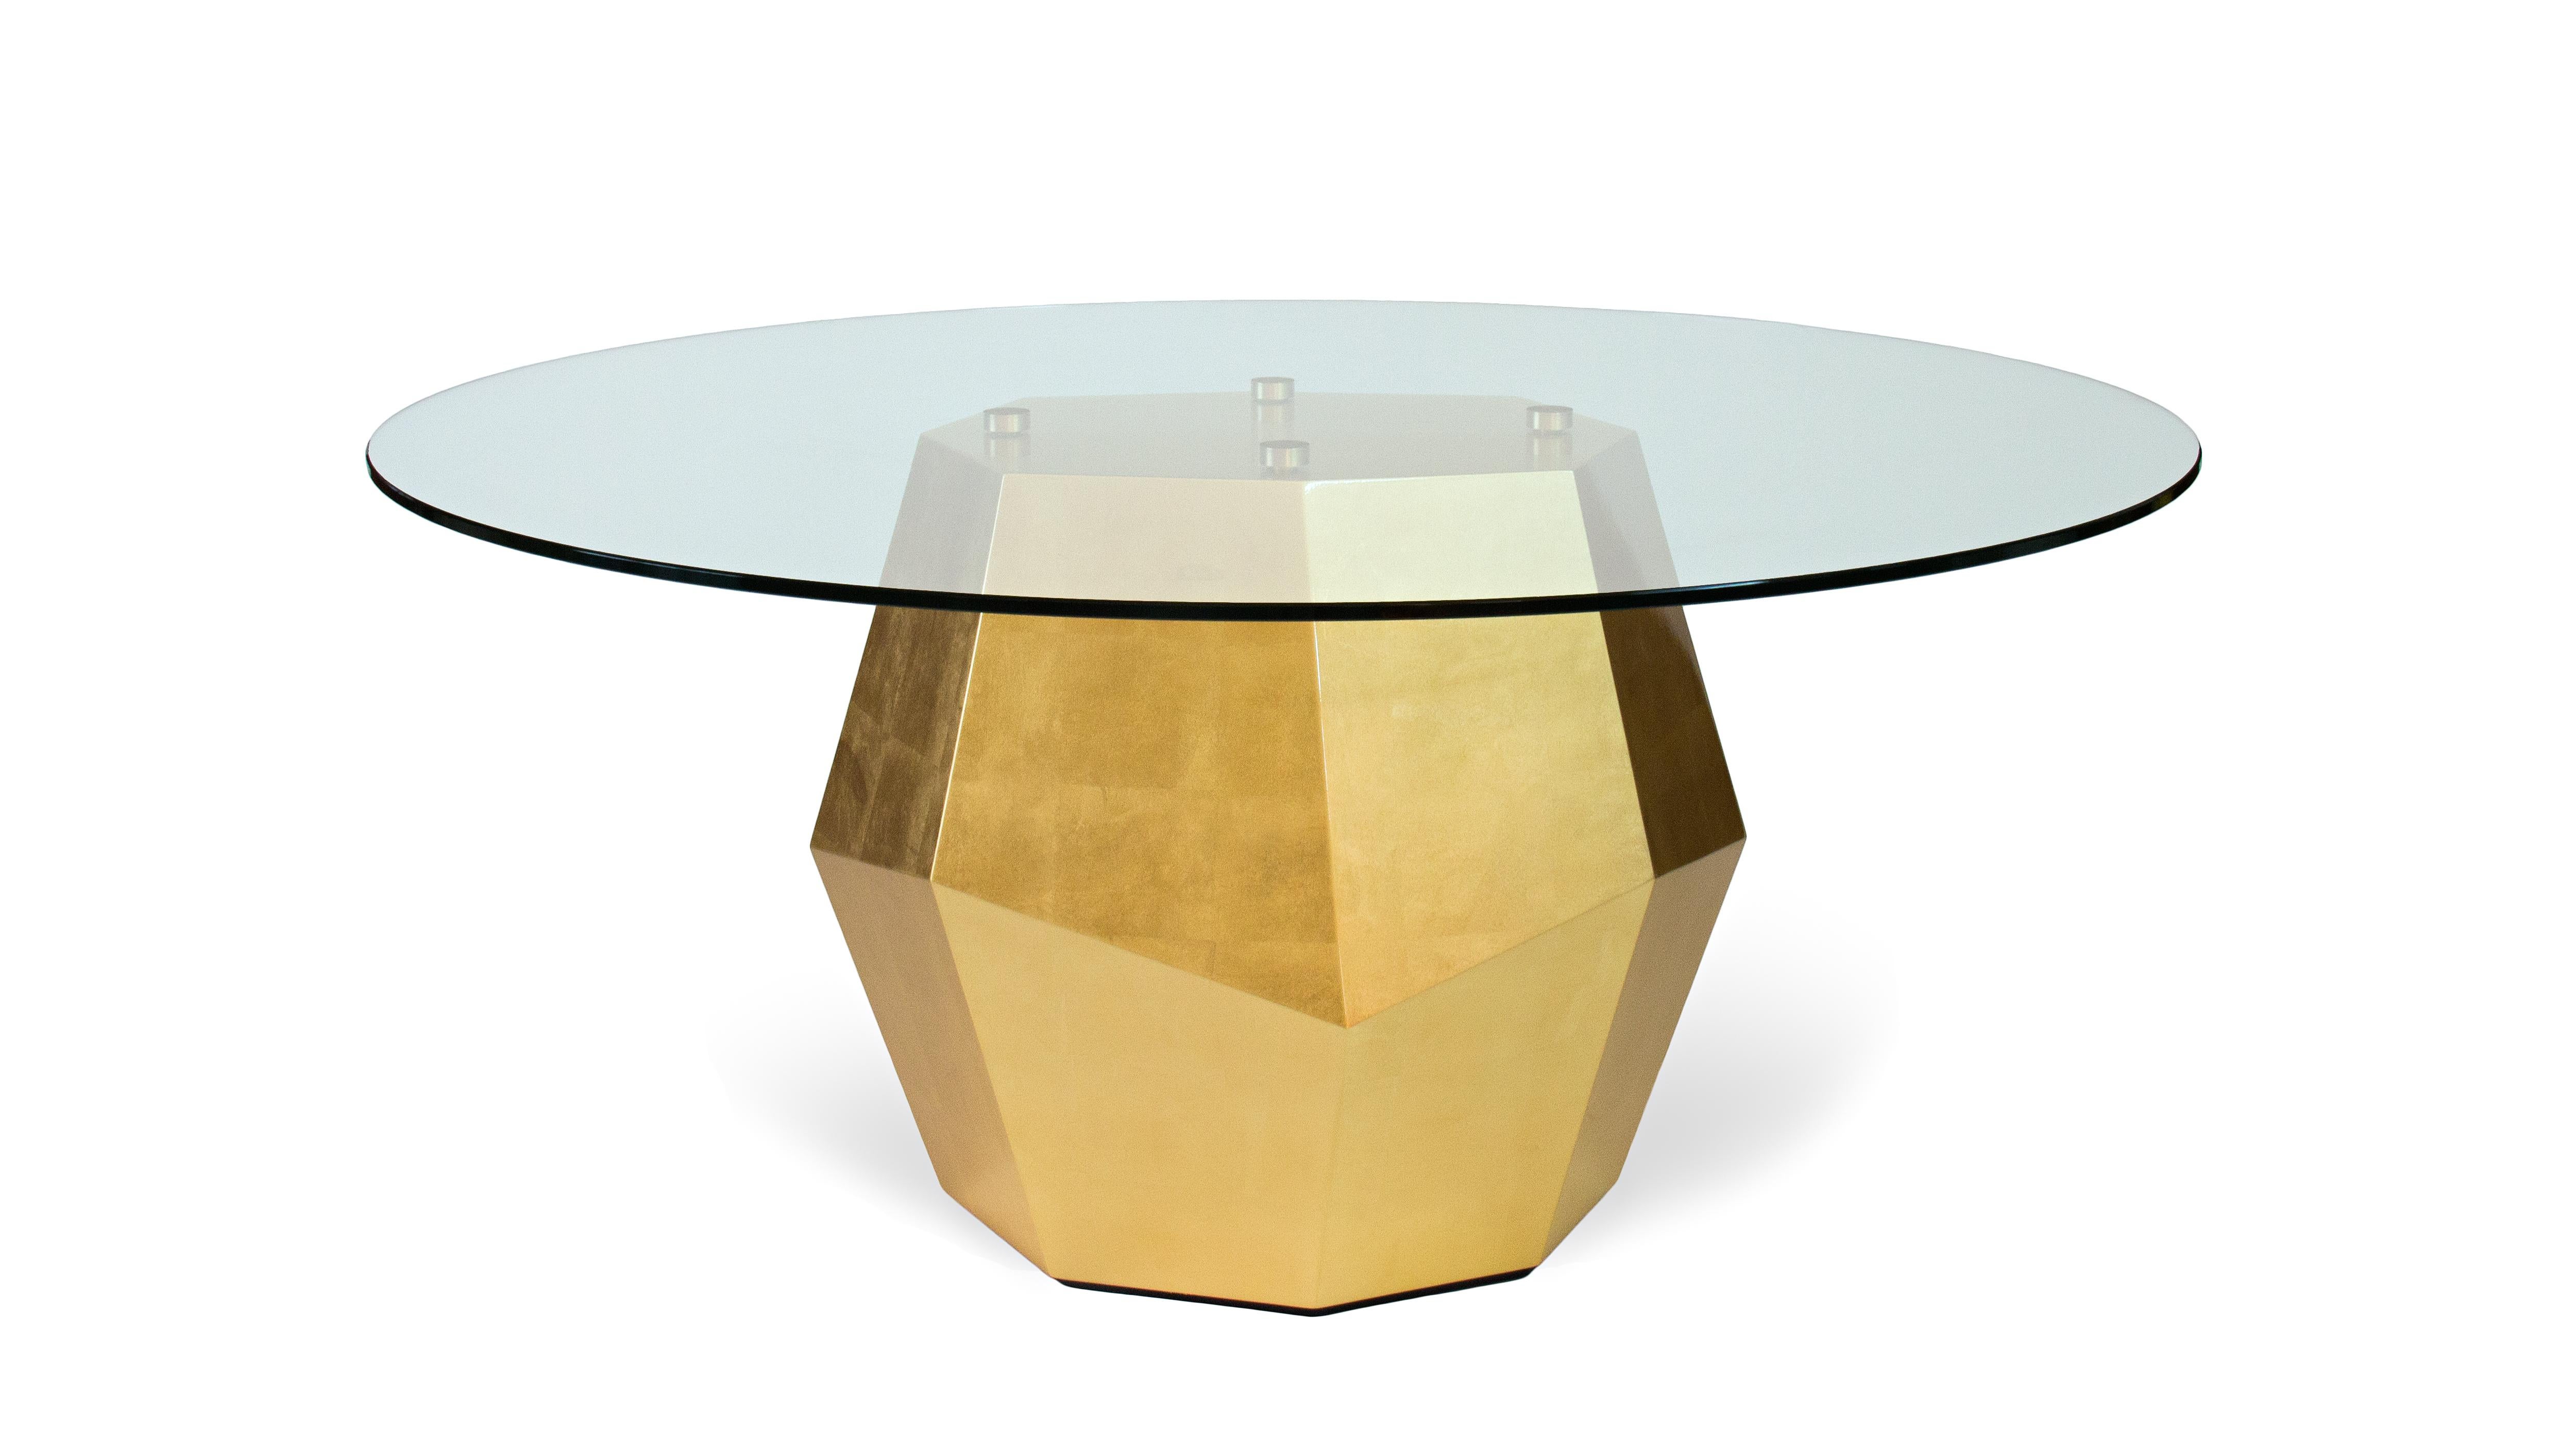 Rock Gold Leaf Dining Table by InsidherLand
Dimensions: D 160 x W 160 x H 74 cm.
Materials: Glass, wood, gold leaf.
130 kg.

The robust volume of Rock dining table entirely finished in walnut veneer on an elegant faceted work that resembles the